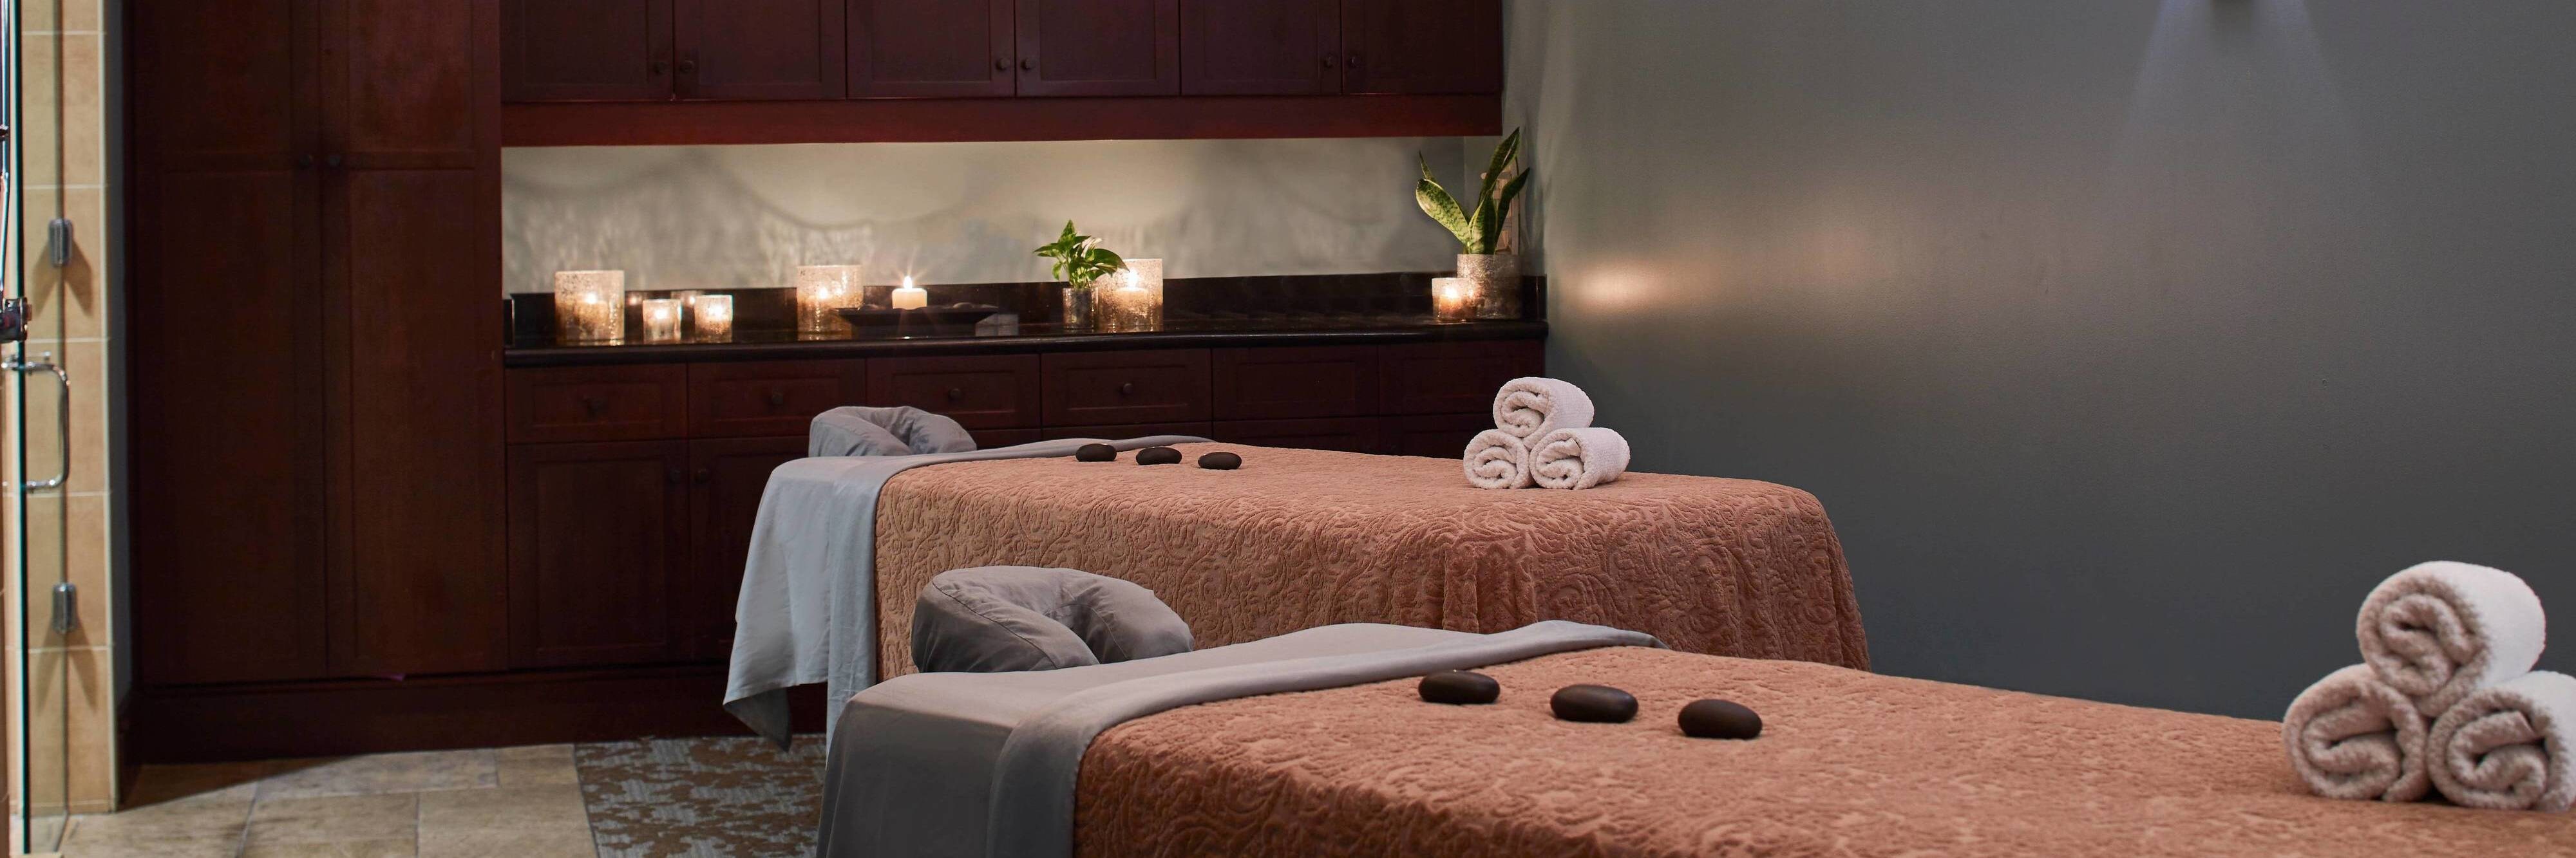 Spa Treatment Room - Couples